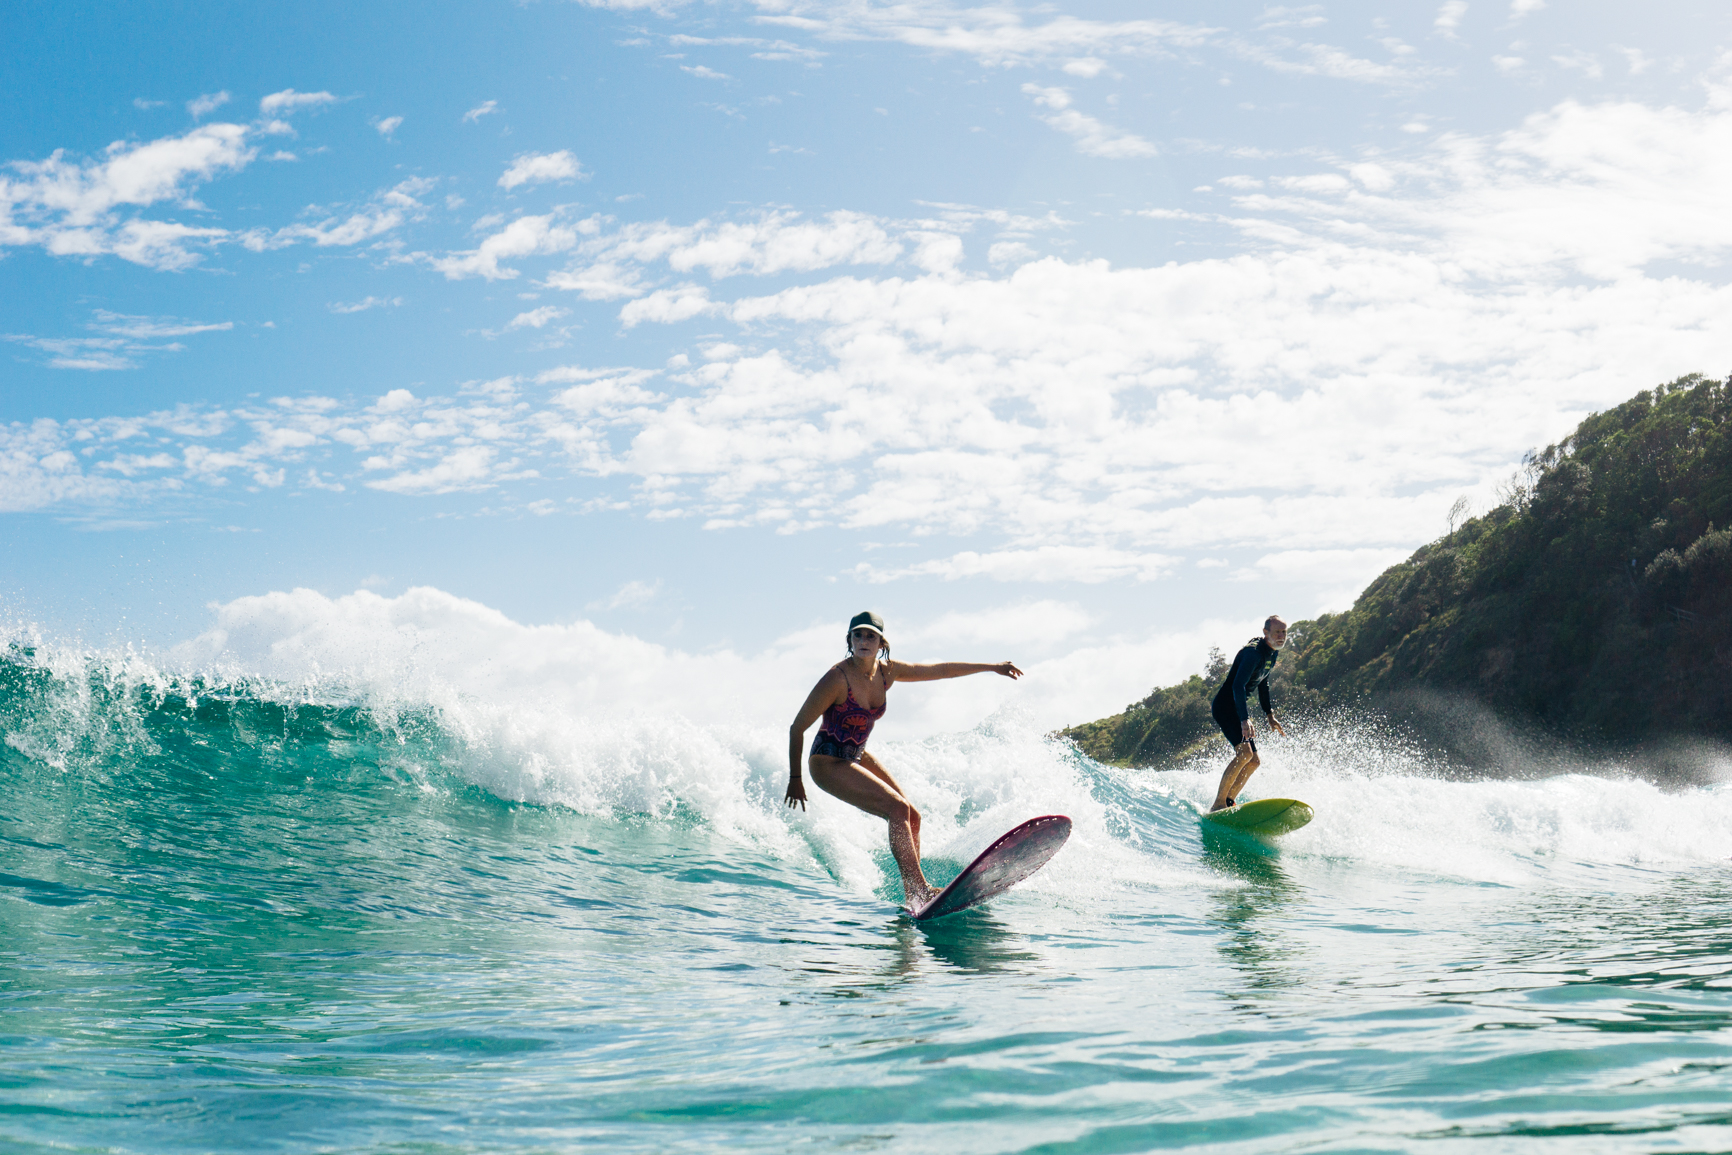 Soul Surfer Surf-and-Stay Holiday in Byron Bay is one of the best wellness retreats in Australia